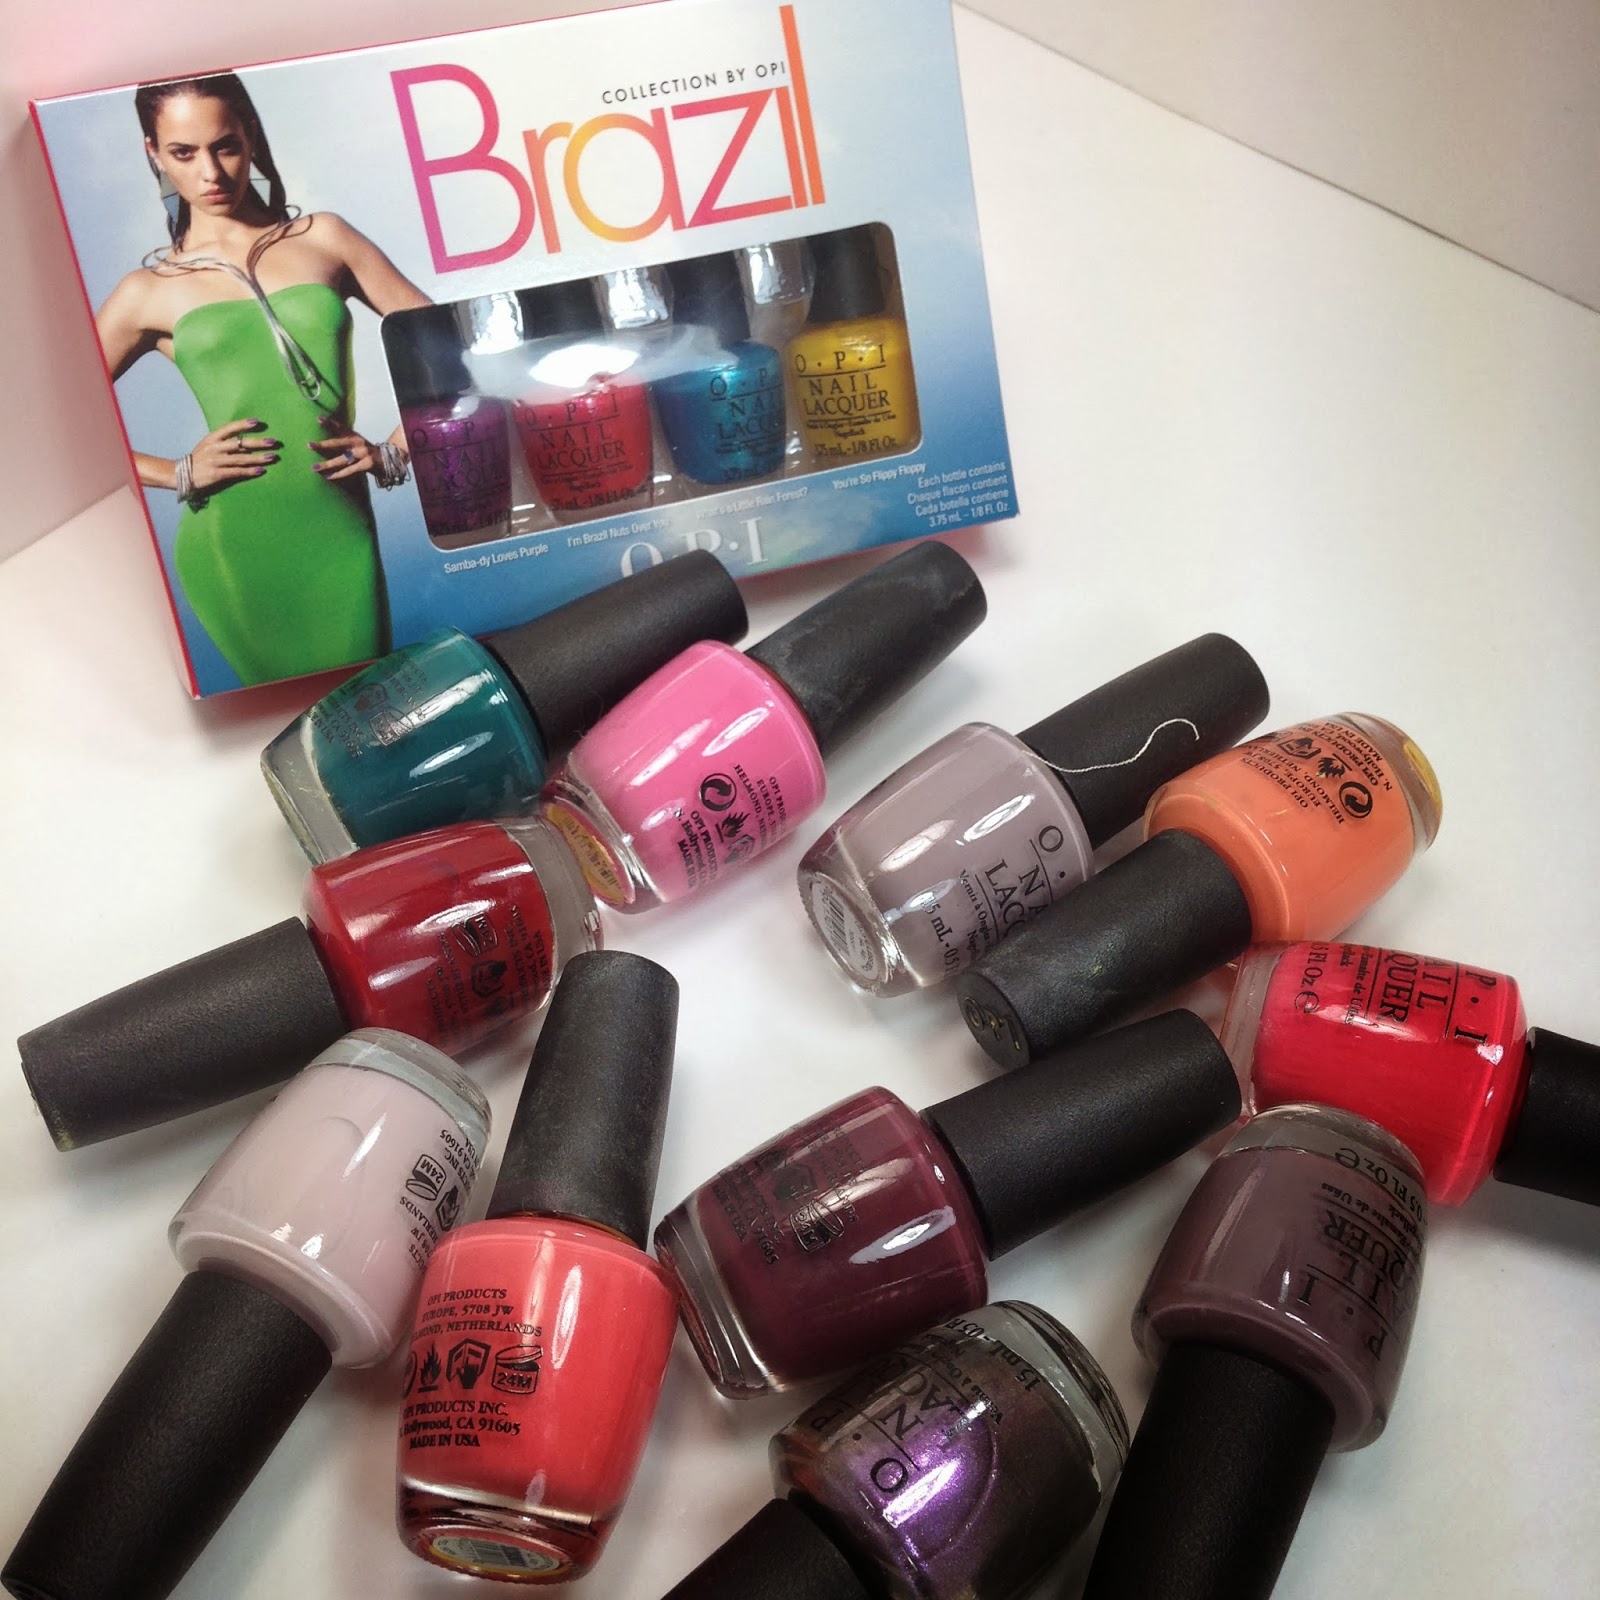 OPI Brazil Nail Polish Collection Swatches and Review Part 2 - The